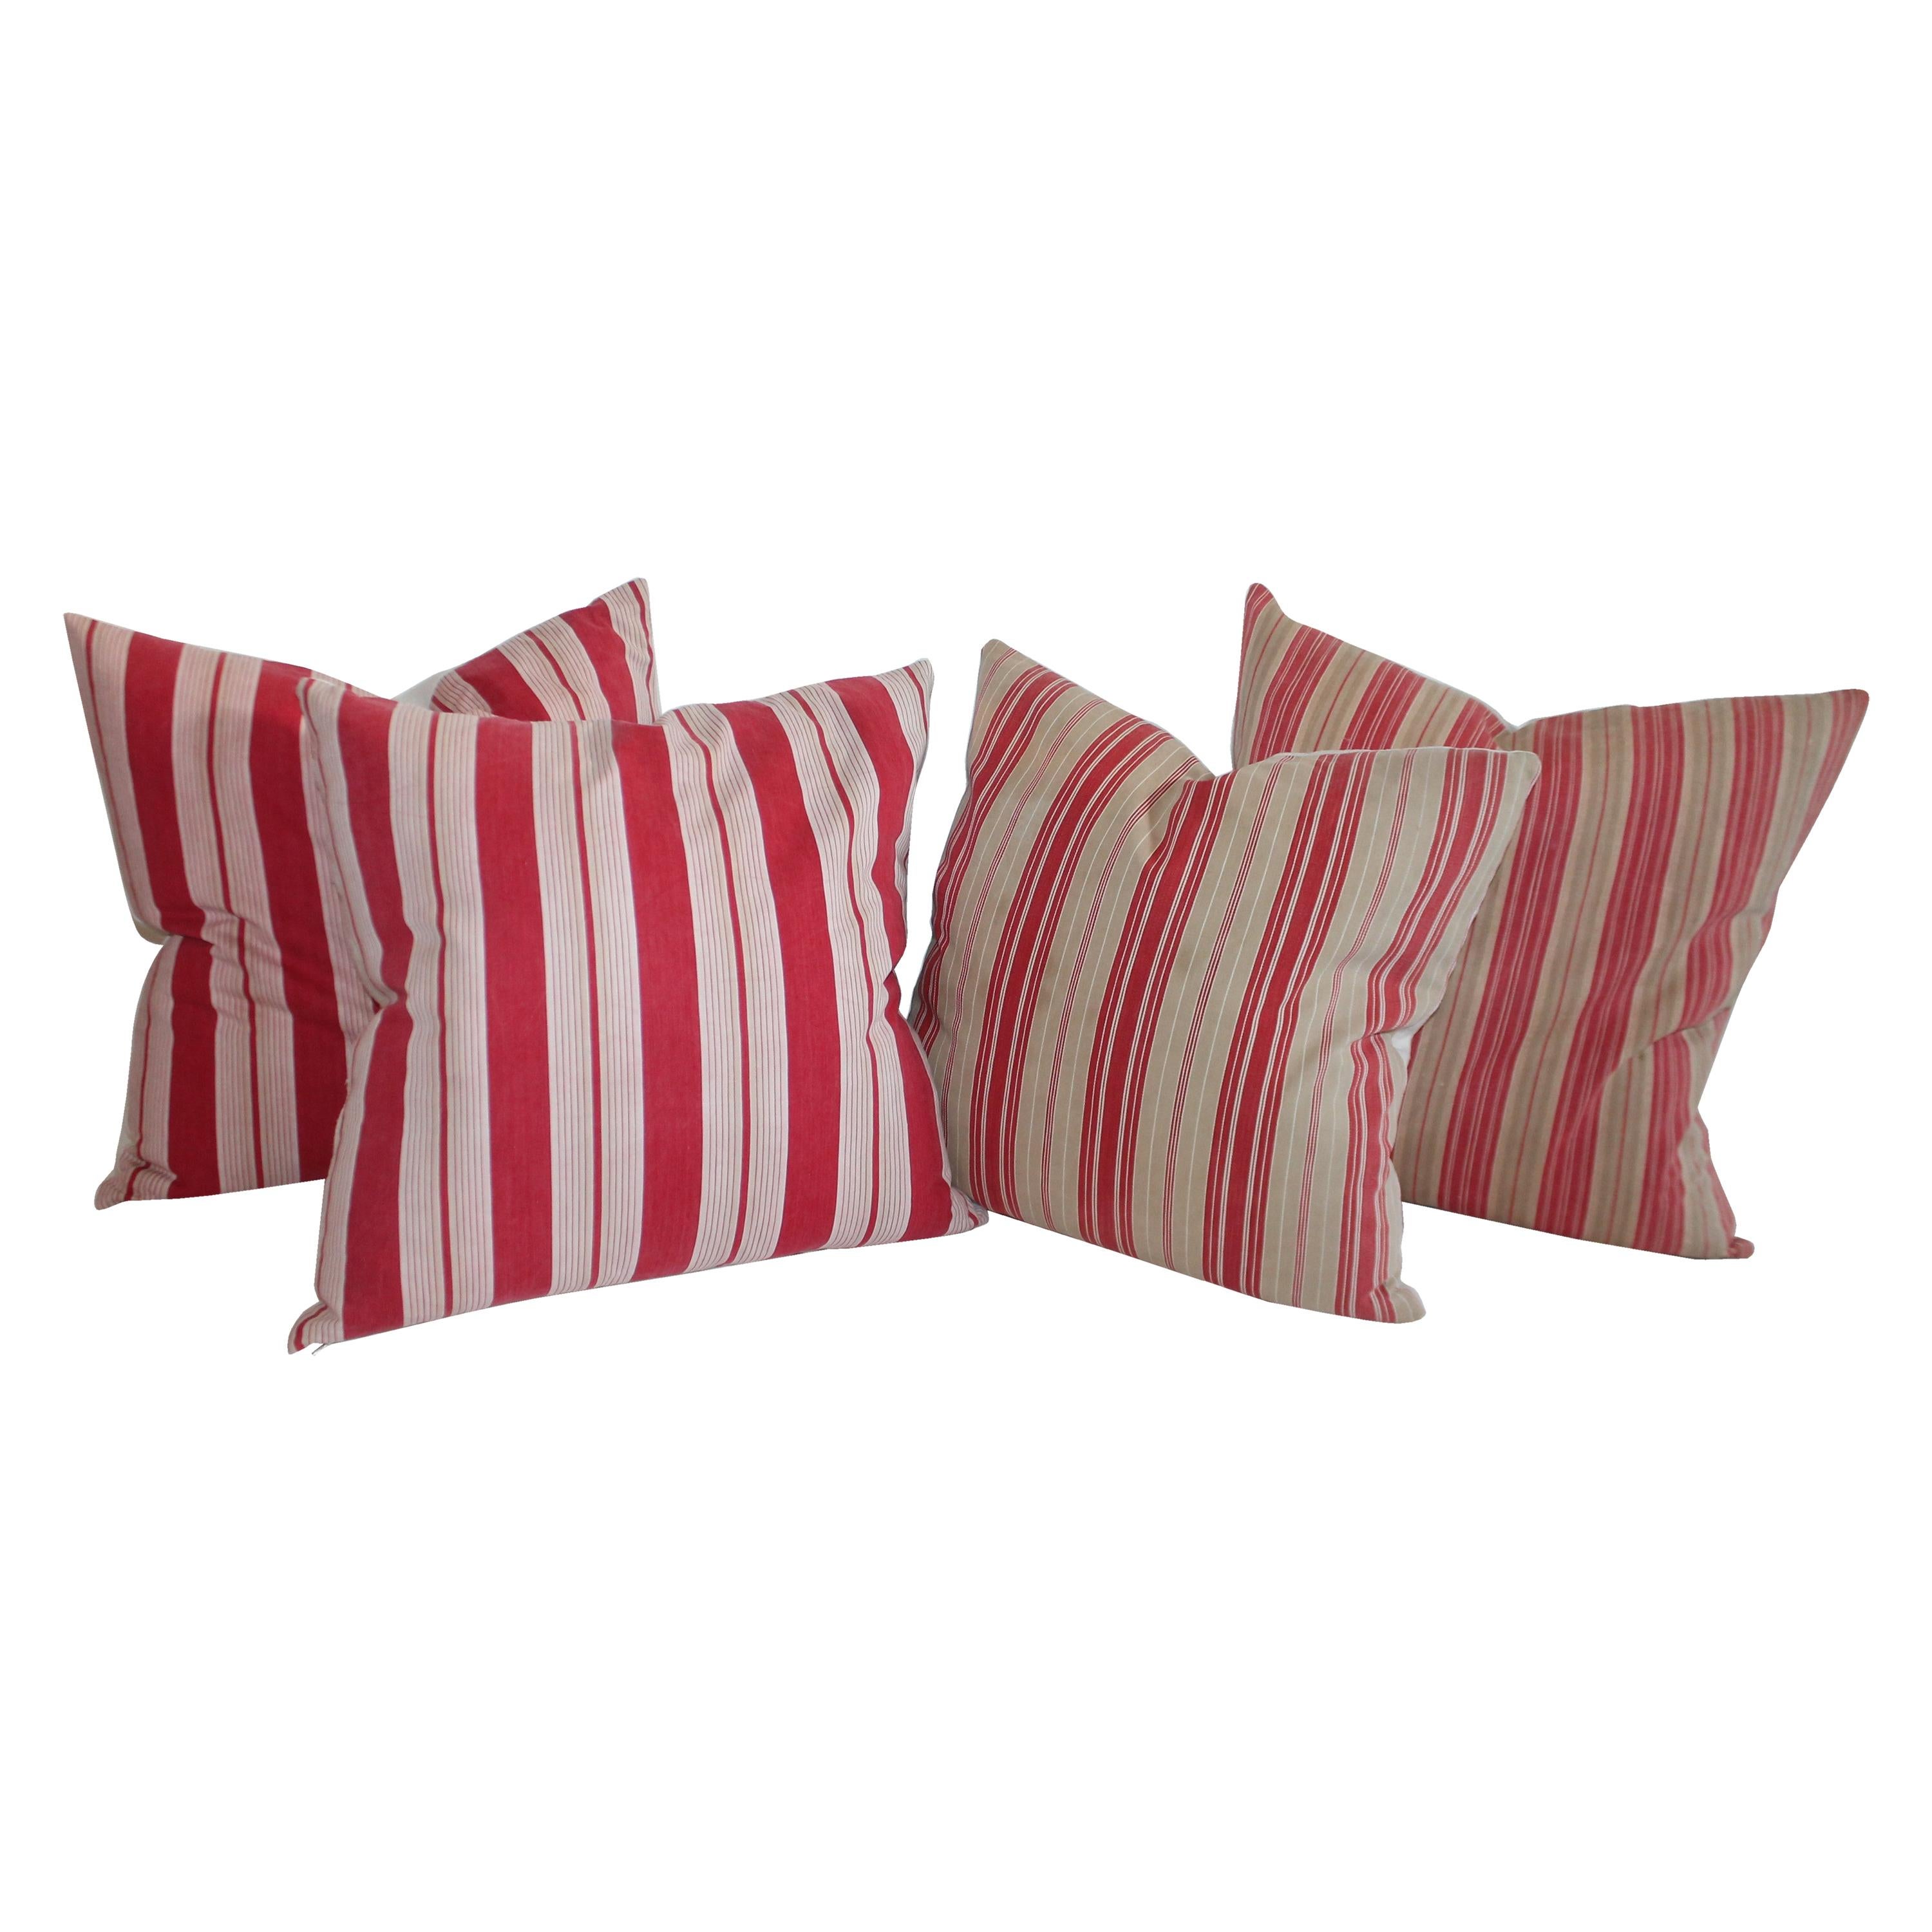 19th Century Antique Ticking Pillows / Two Pairs For Sale